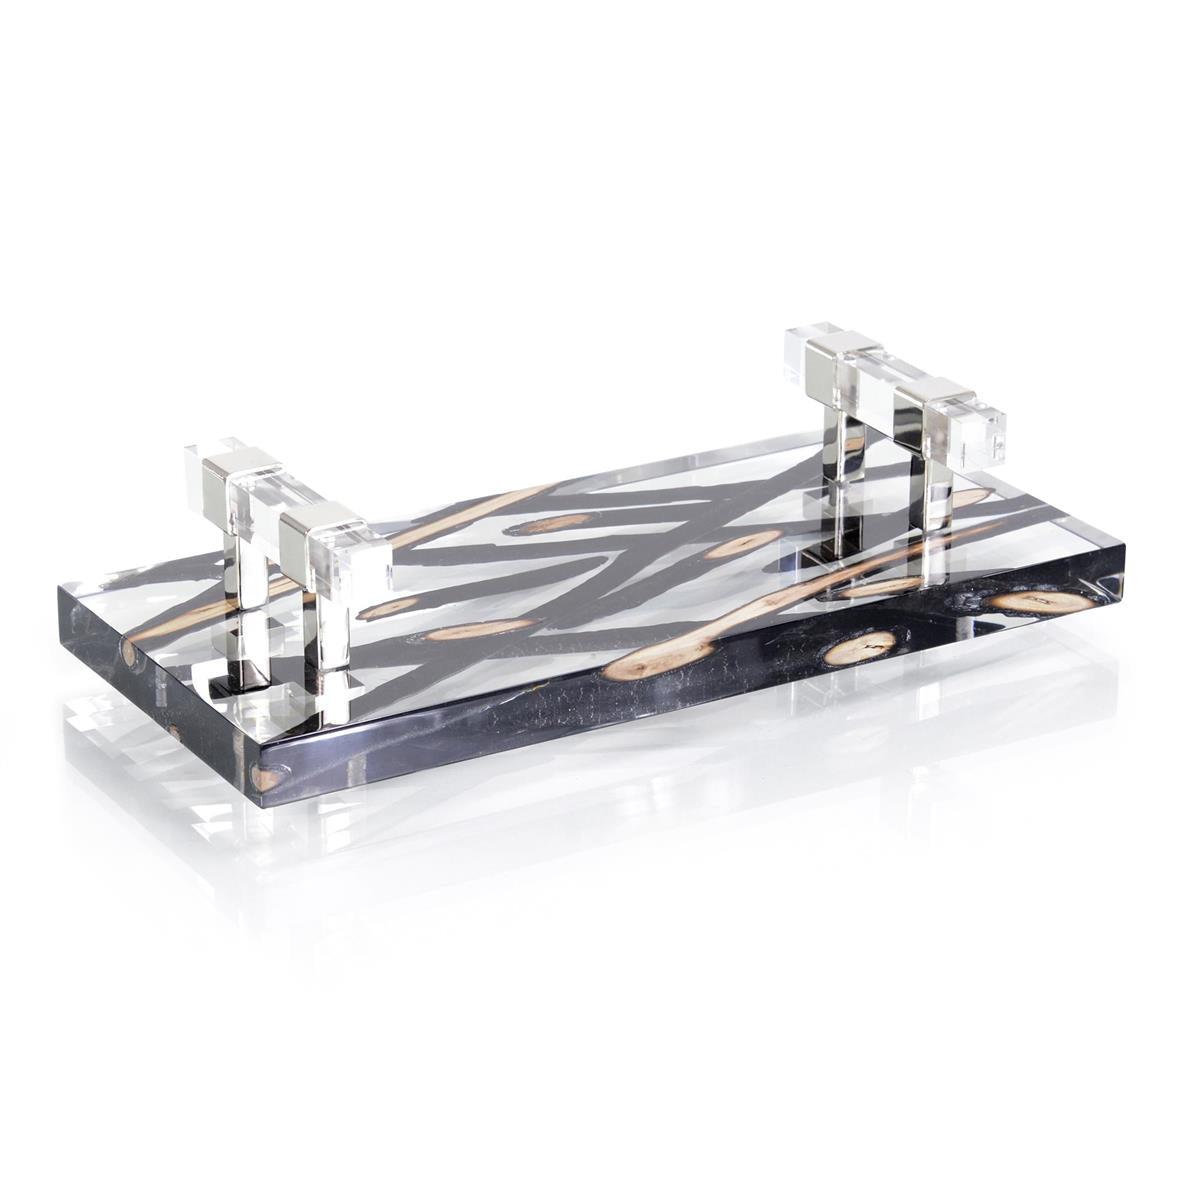 Charred Branches Suspended In Acrylic Tray-John Richard-Trays-Artistic Elements